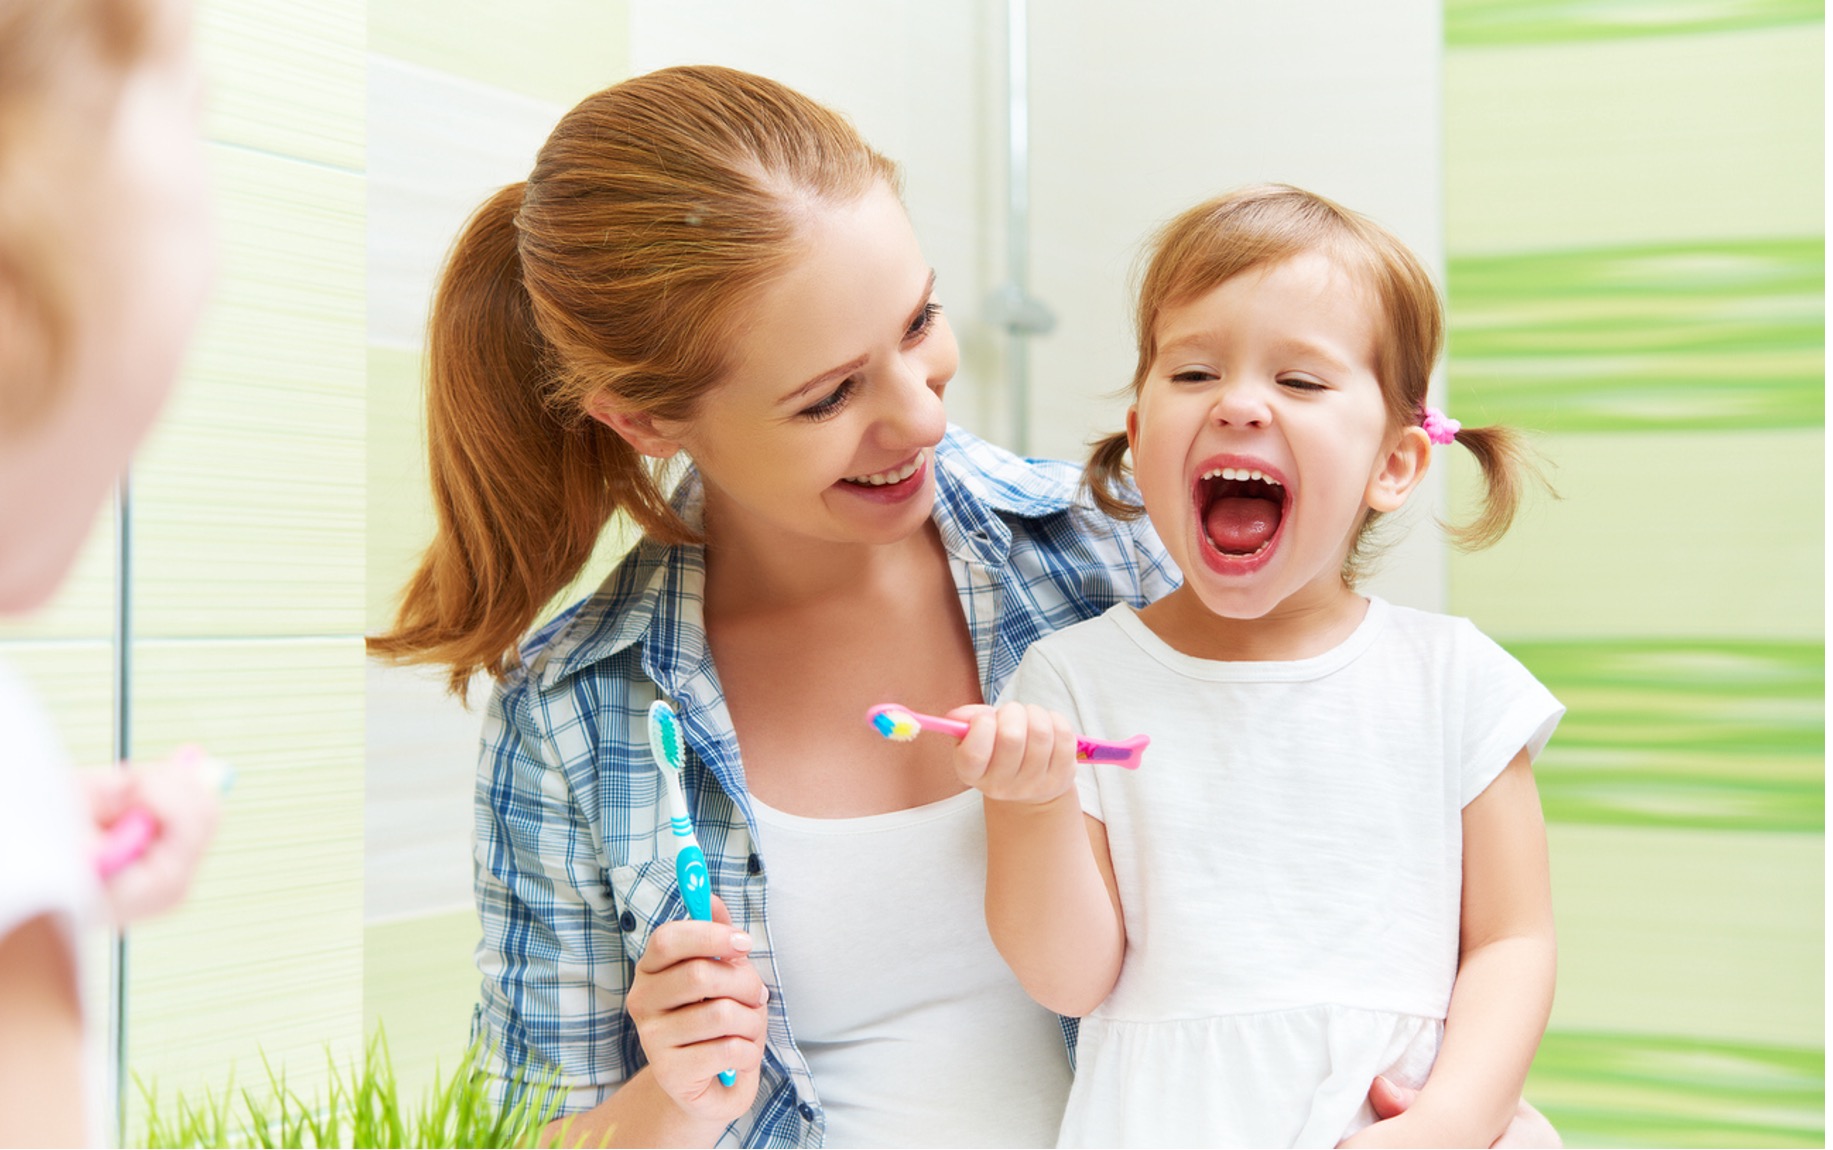 A picture containing person holding a happy child with a toothbrush in hand